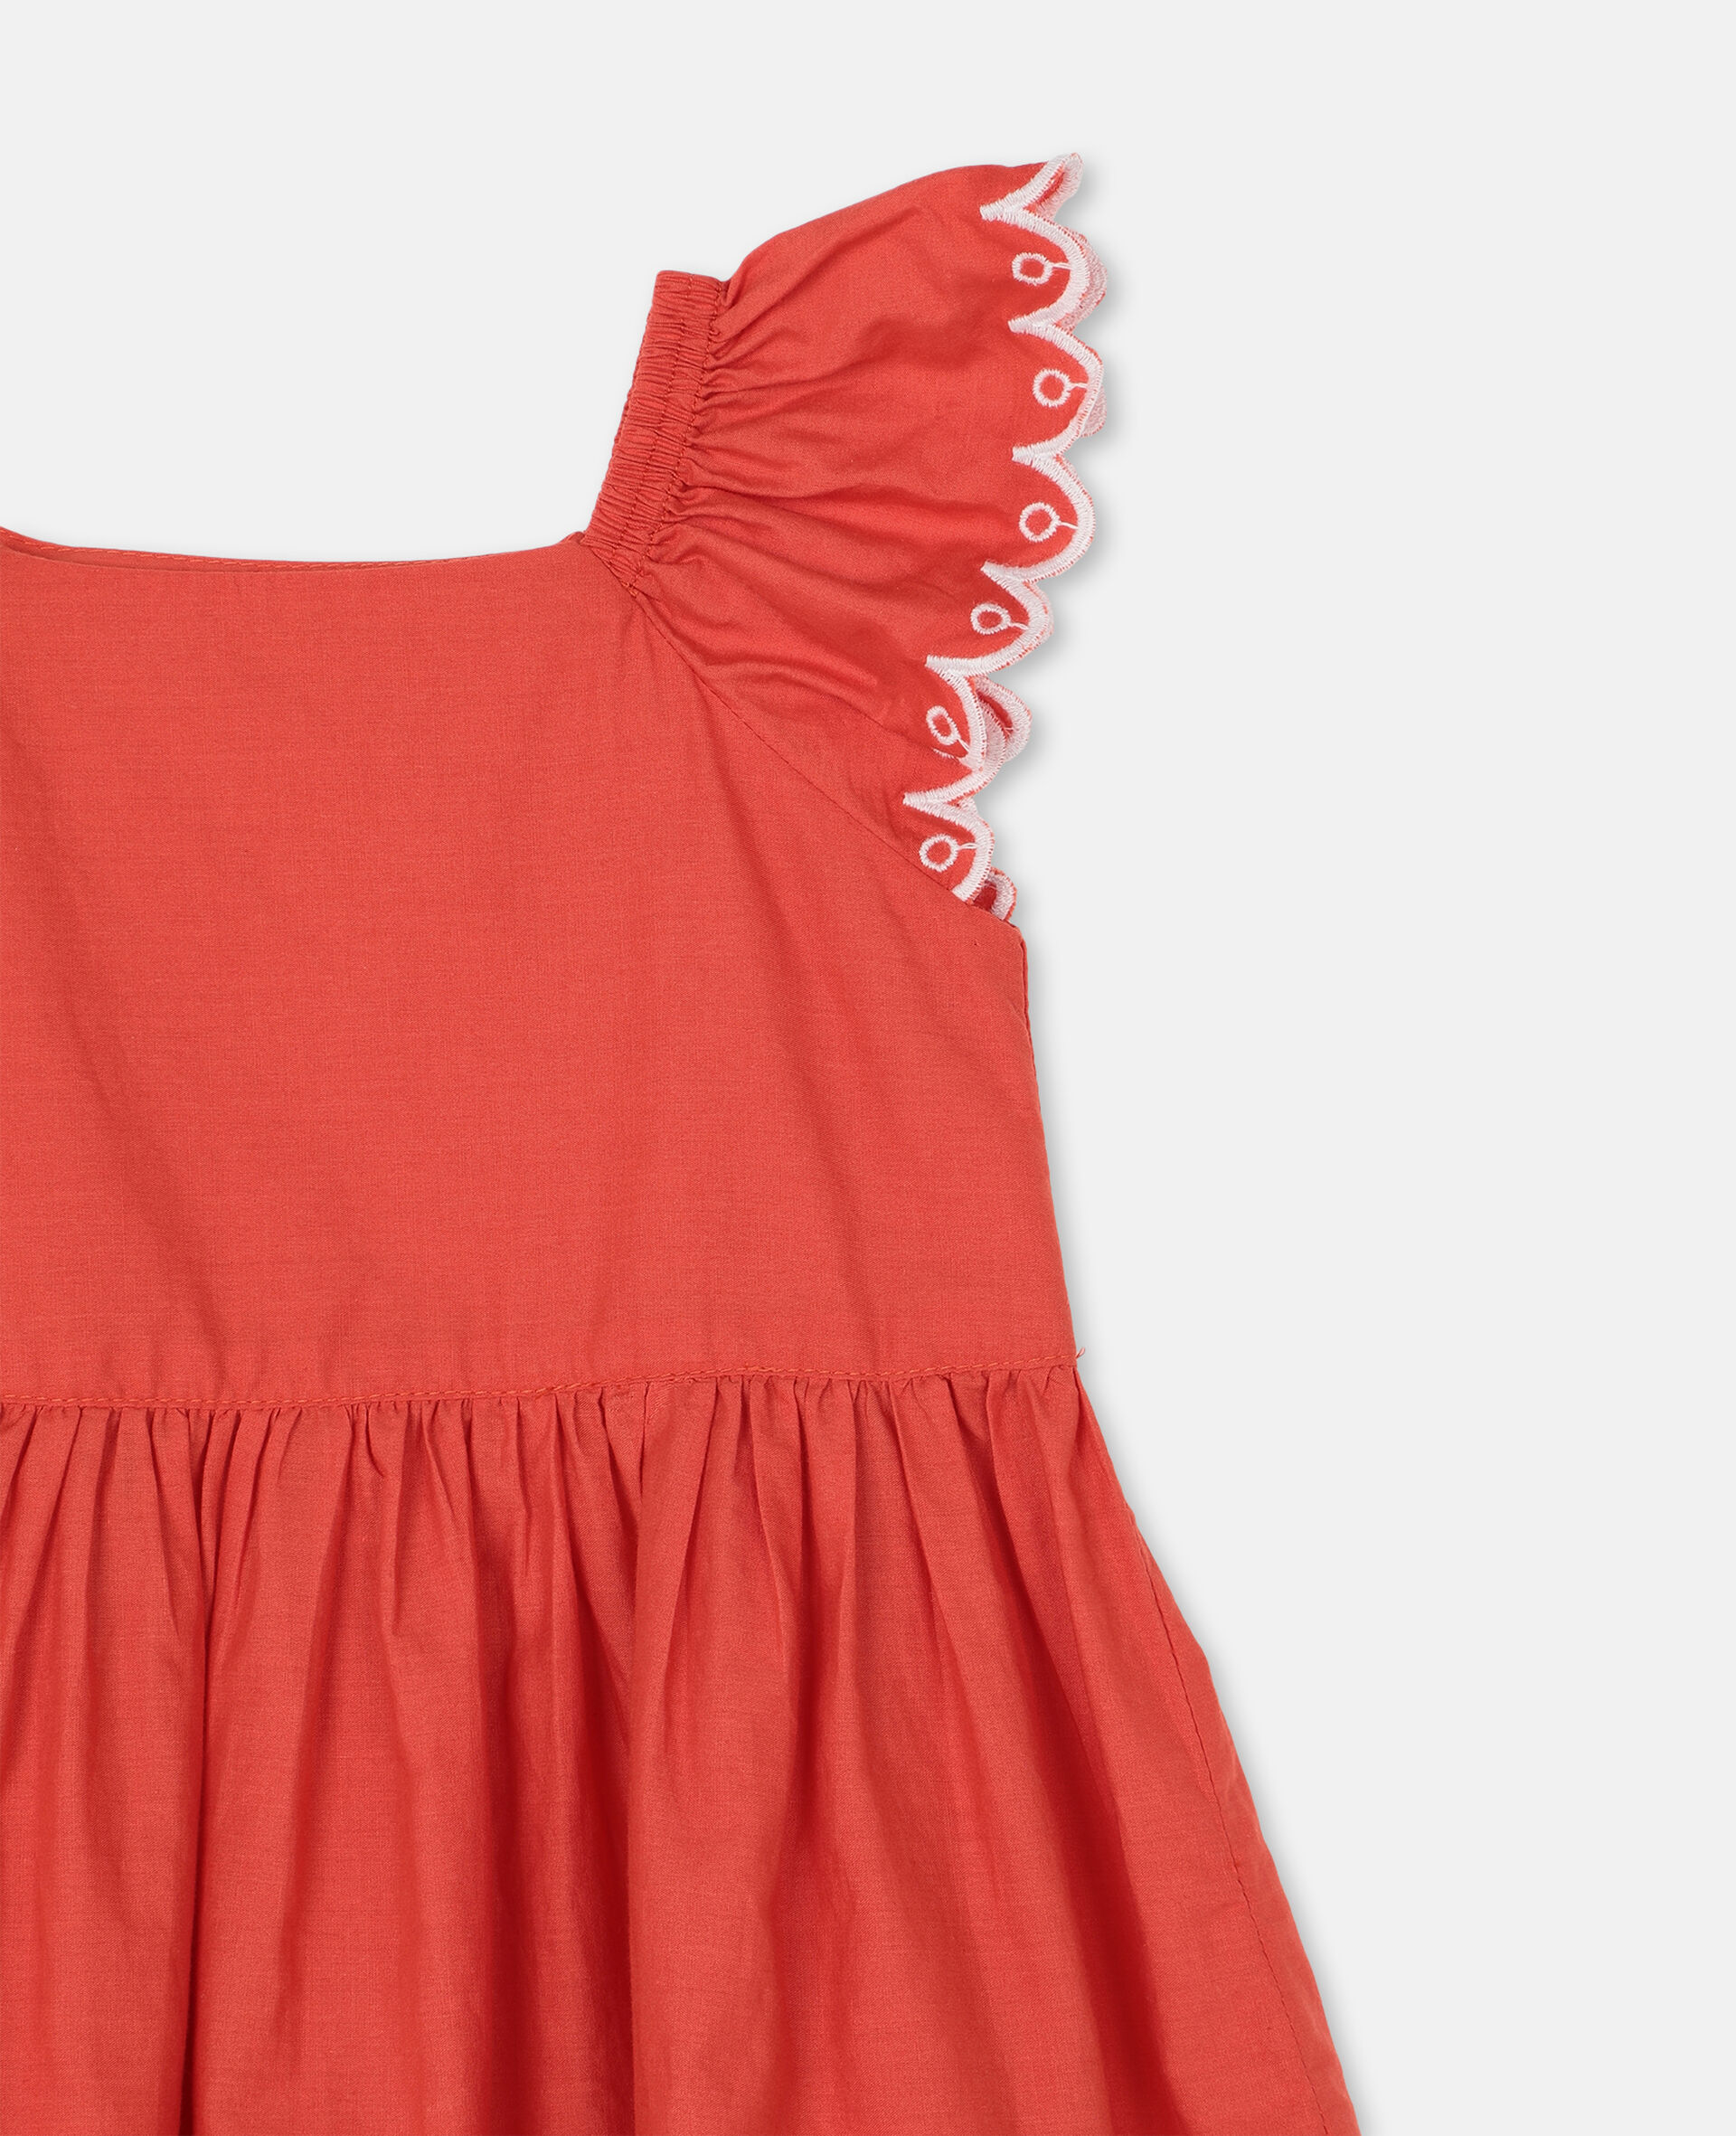 Scalloped Cotton Dress-Red-large image number 1